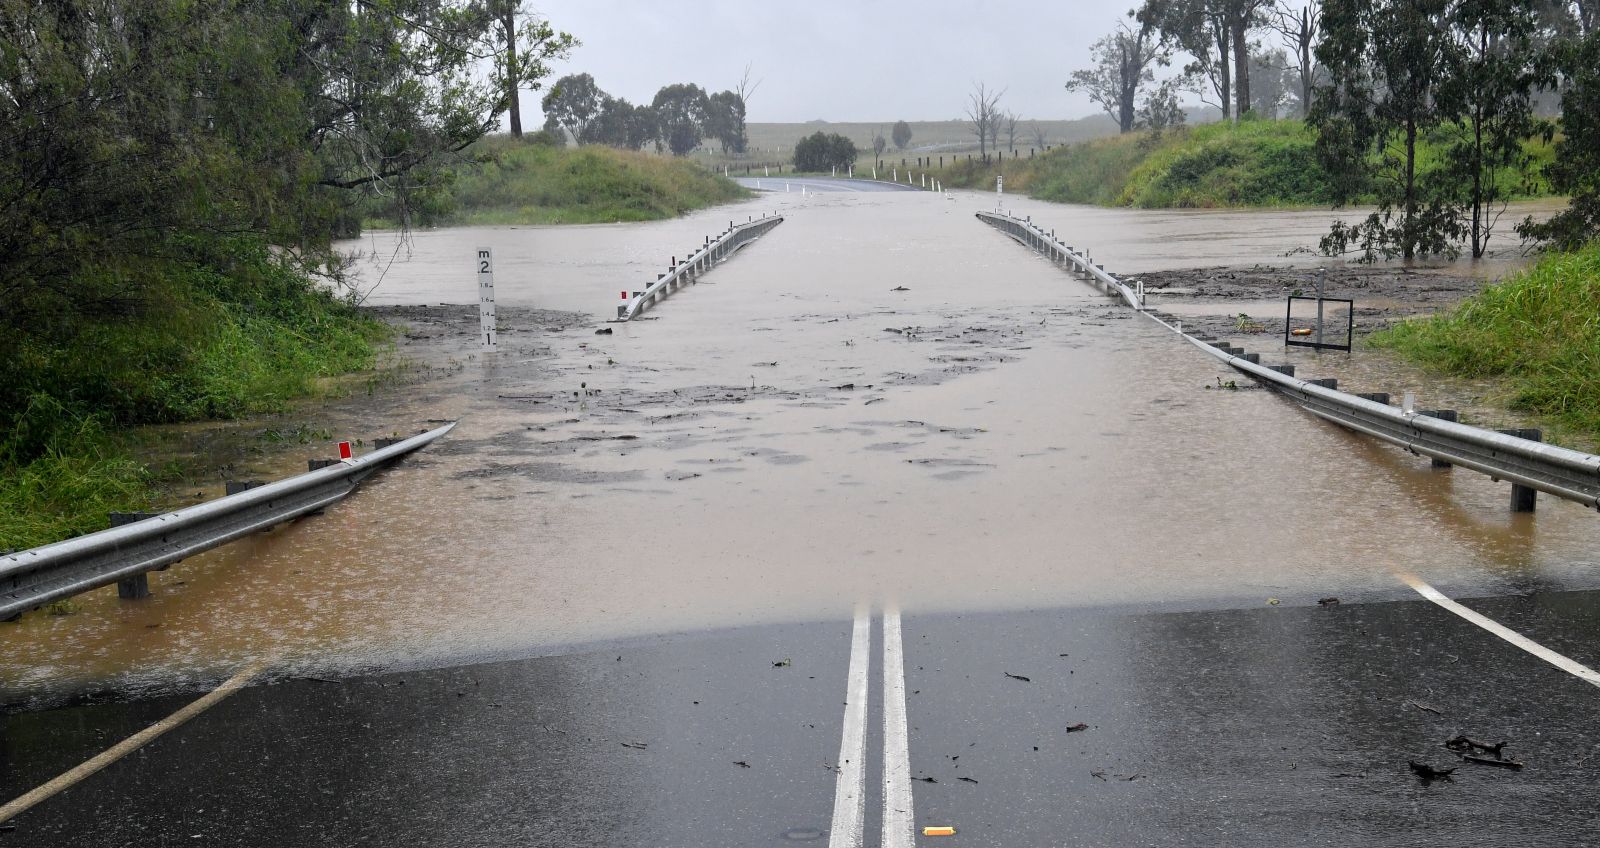 epa09090923 A bridge is submerged under flood waters at Jimboomba, near Brisbane, Australia, 23 March 2021. The weather bureau is warning of potentially life-threatening conditions from torrential rain and storms in southern Queensland.  EPA/DARREN ENGLAND AUSTRALIA AND NEW ZEALAND OUT